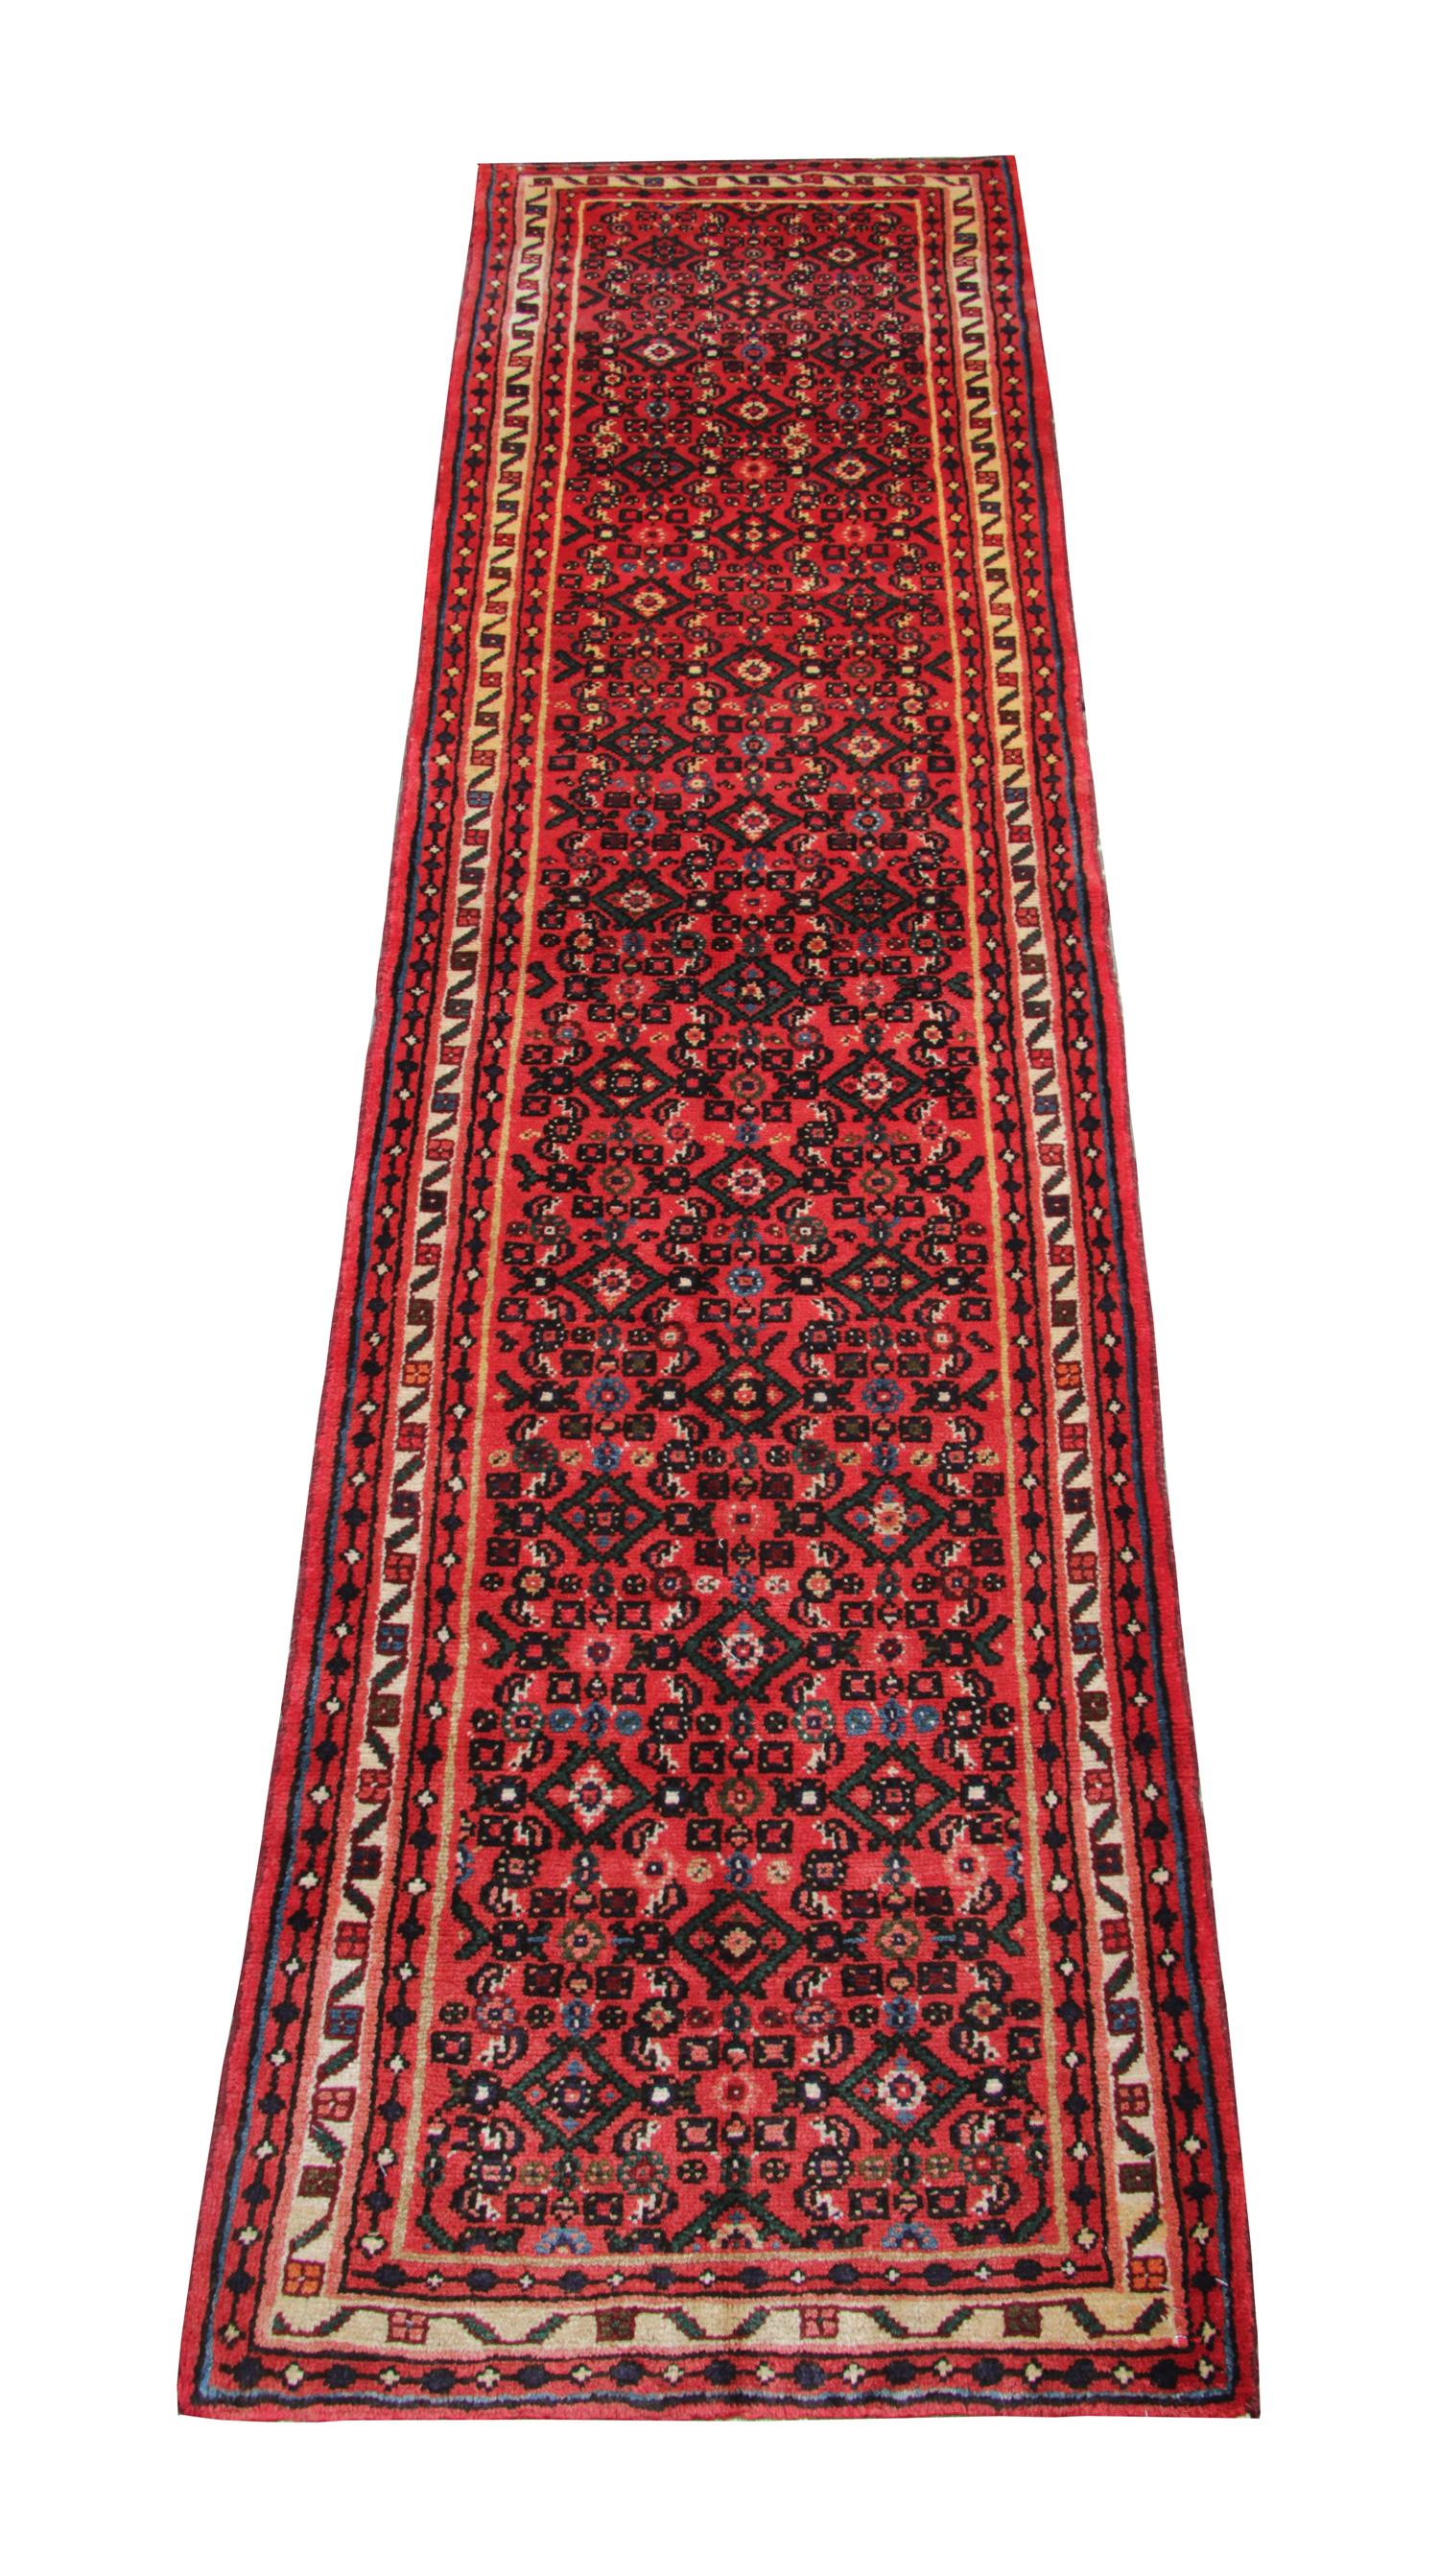 This vintage wool runner rug was woven by hand in the 1960s and featured a rich red background and geometric design made up of brown and beige accent colours. Constructed with the finest organic materials, including hand-spun wool, which has been